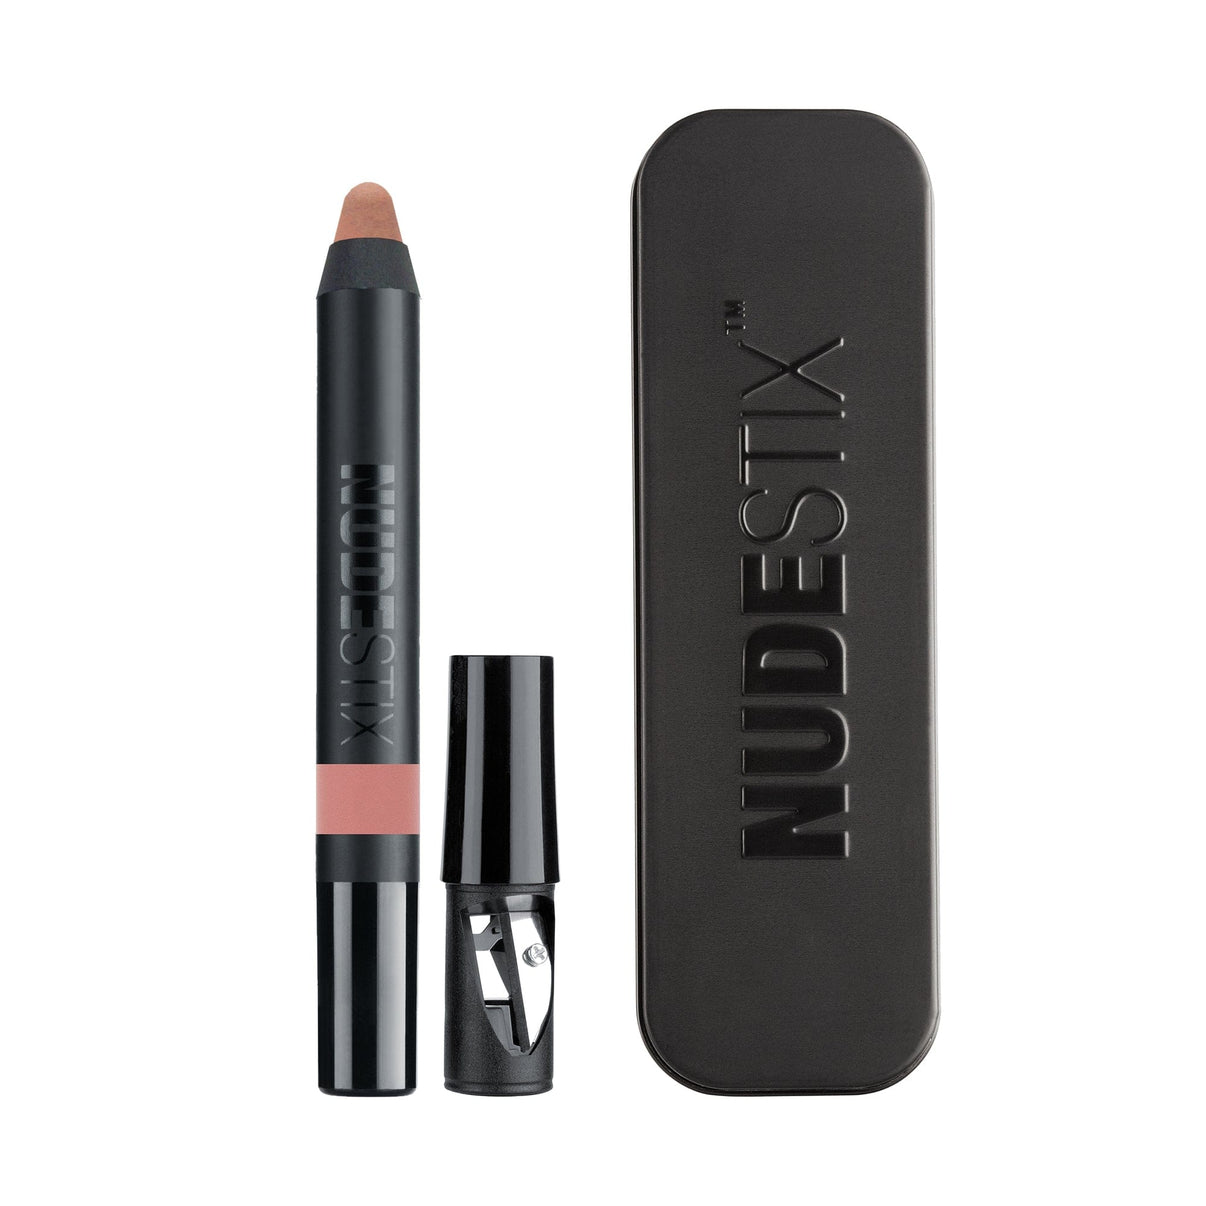 Intense Matte Lip + Cheek pencil in shade tamed with sharpener and nudestix can